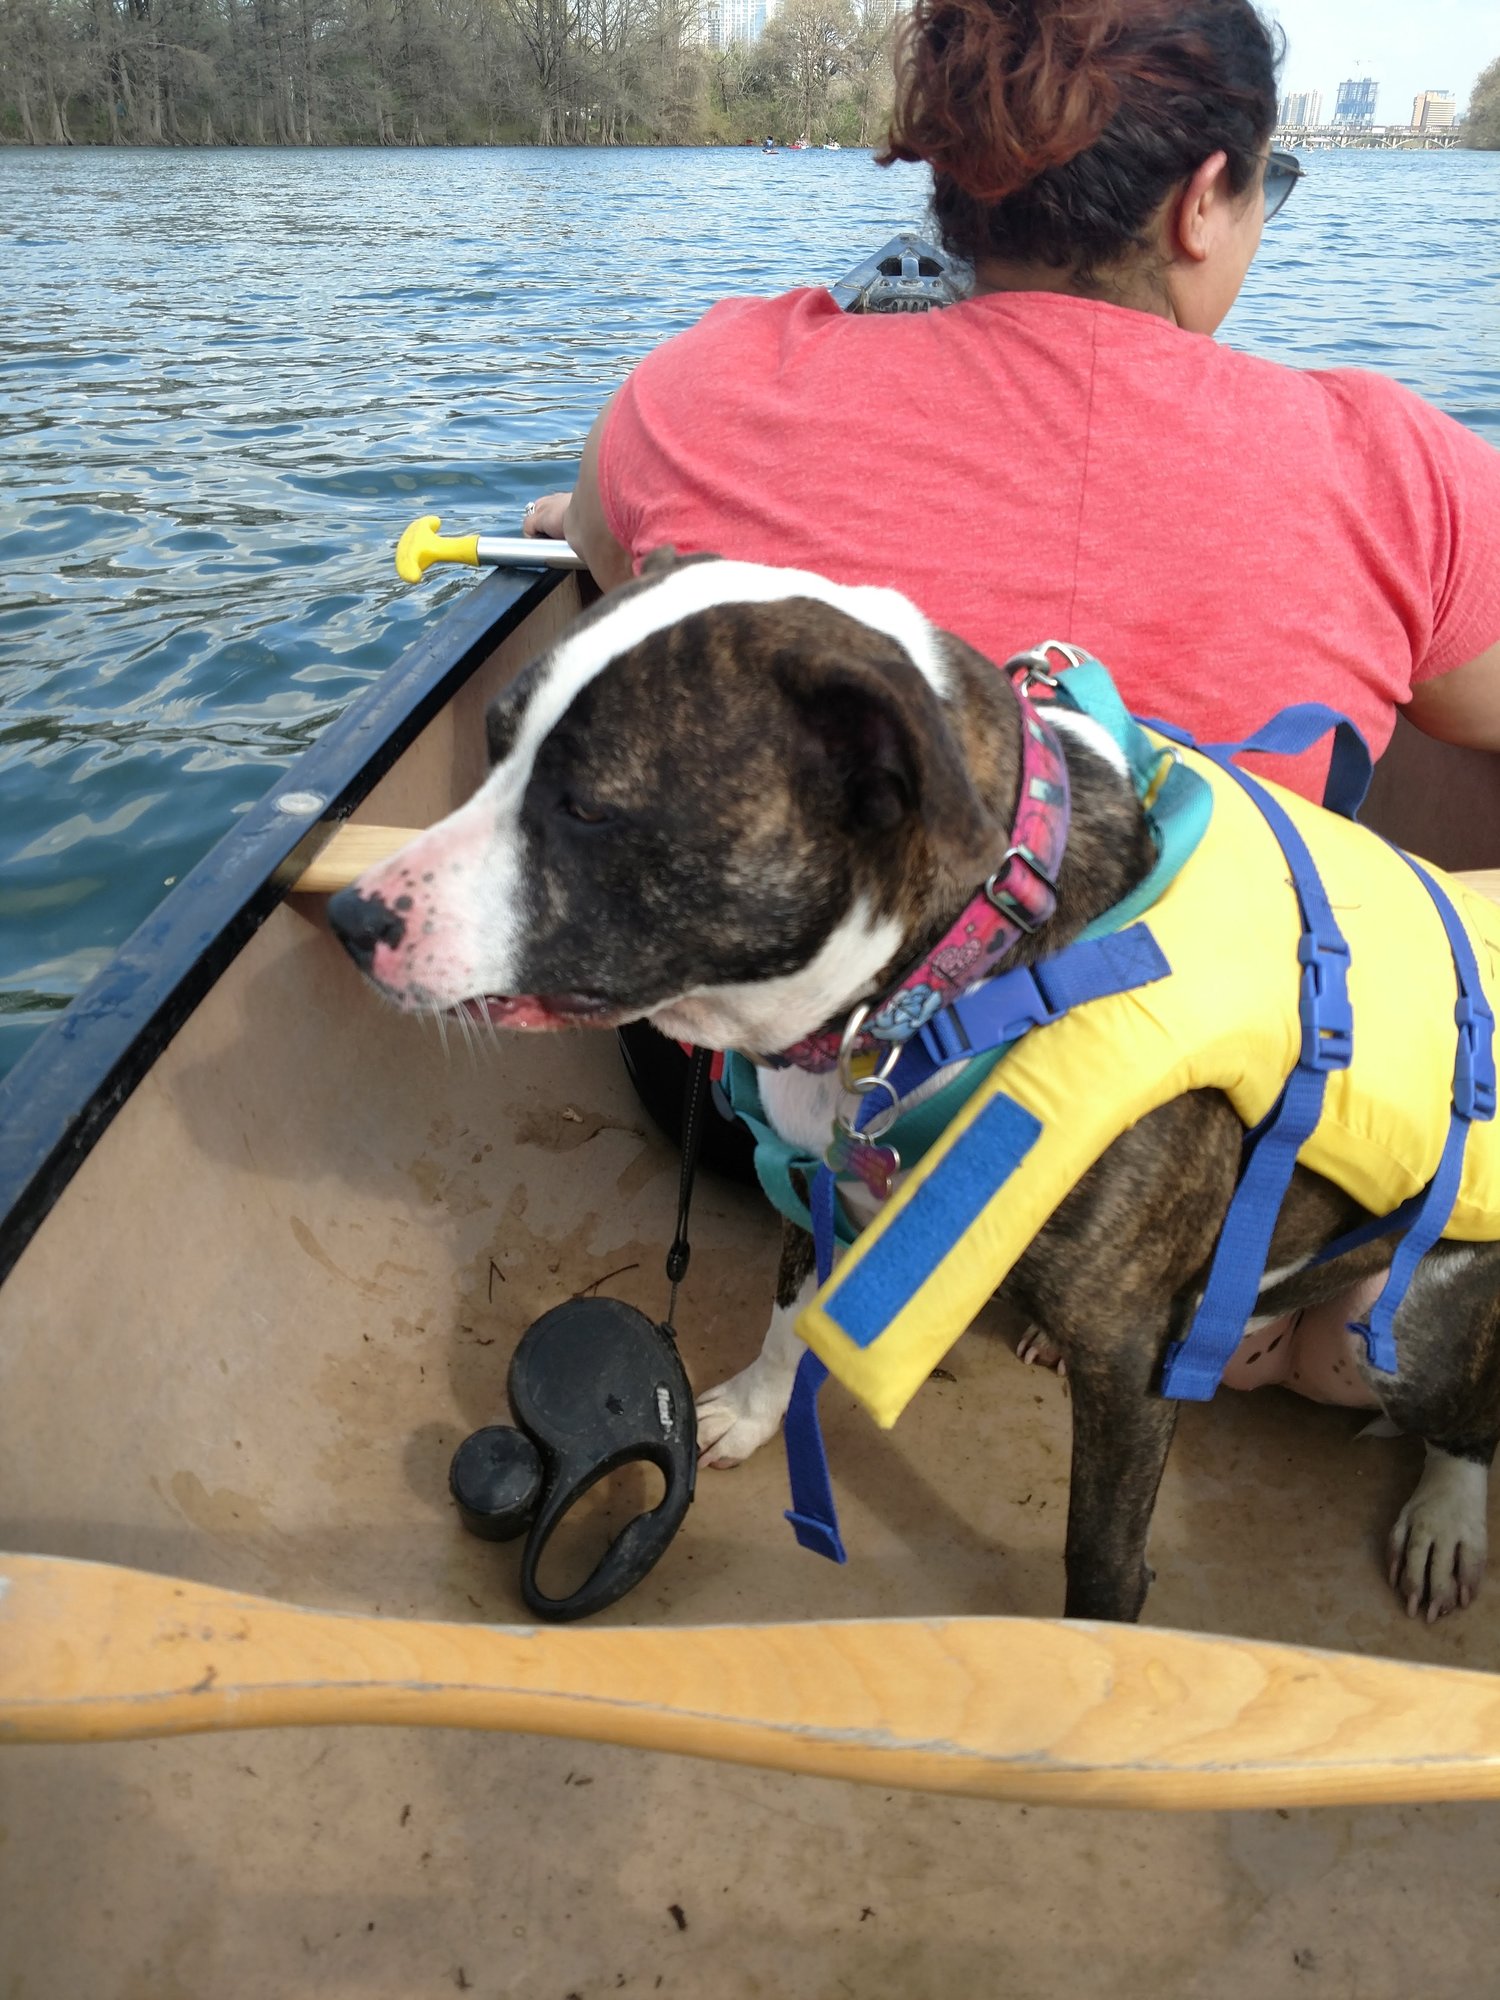 Kayaking with Miss Harley Quinn